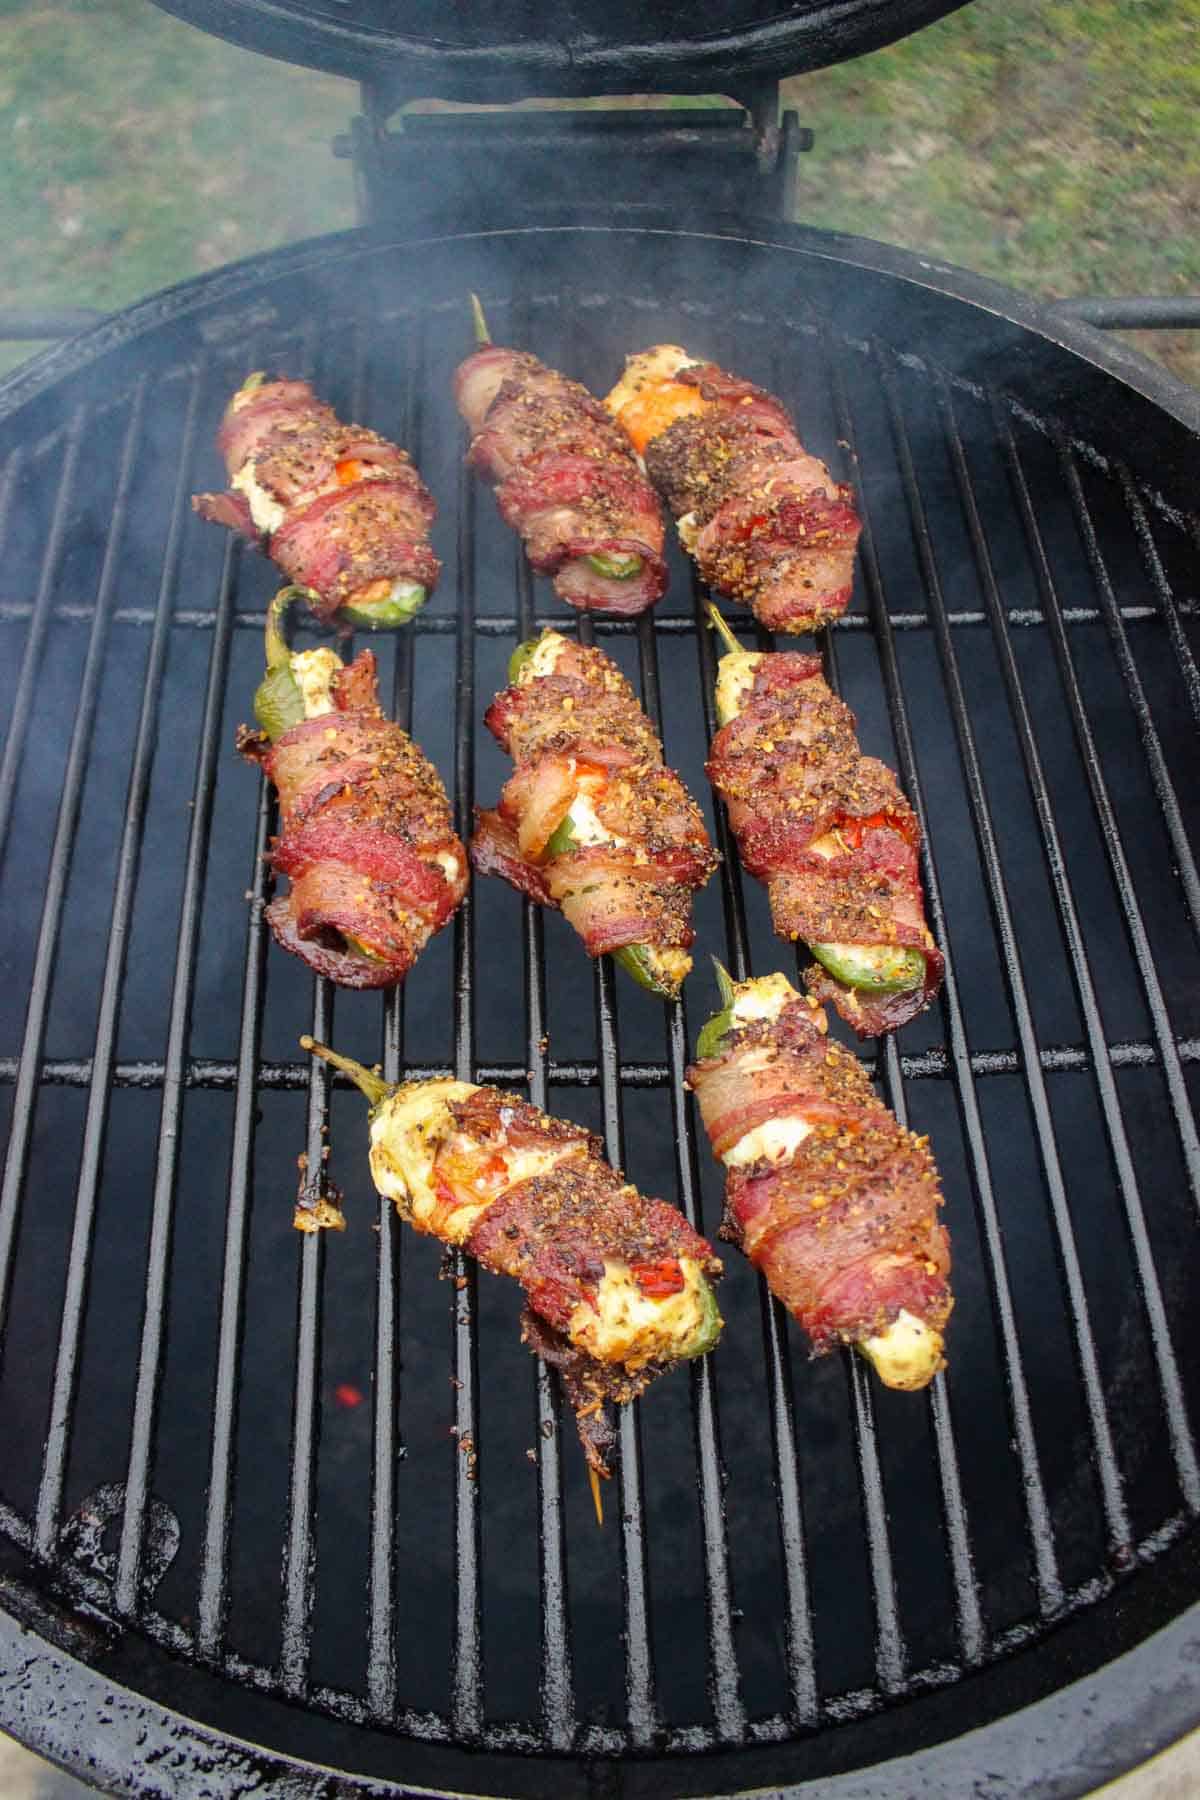 The jalapeño poppers almost finished cooking on the smoker.